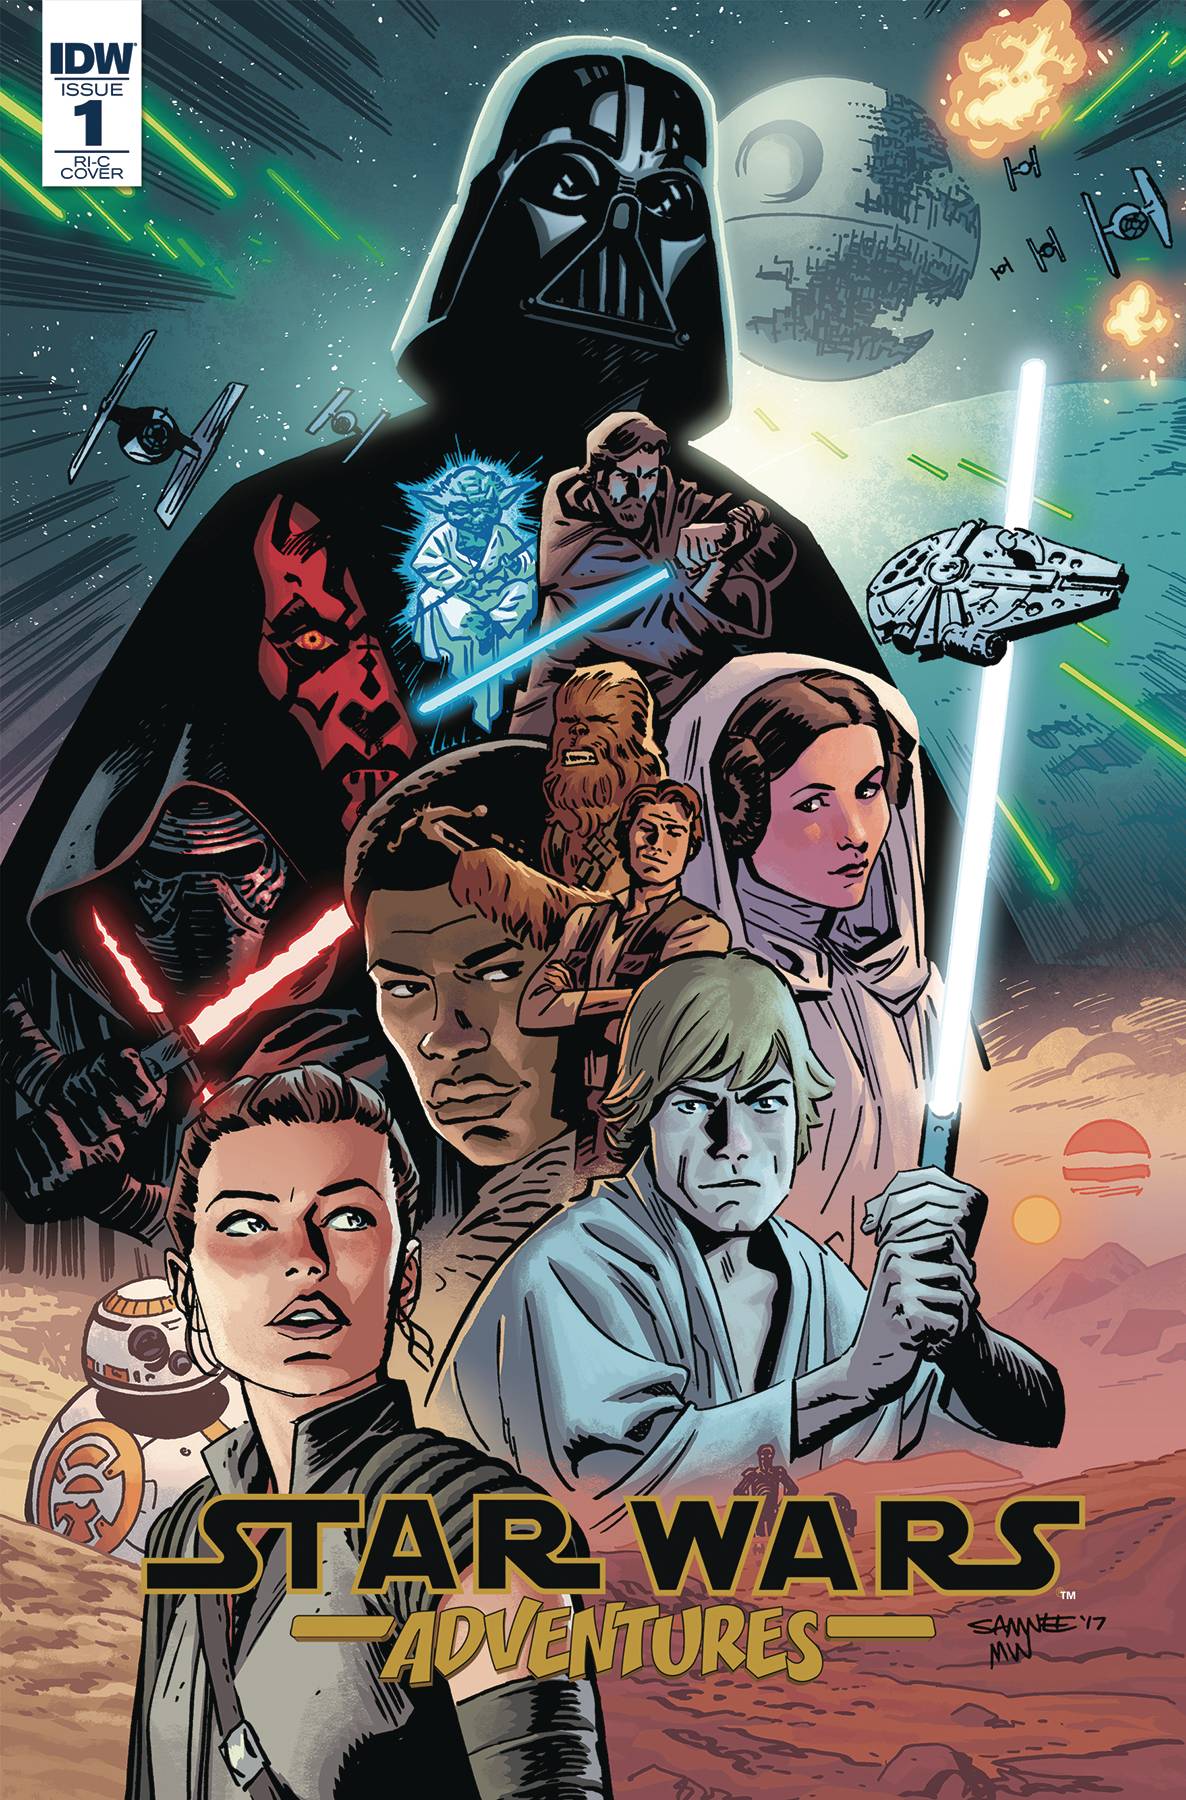 Star Wars Adventures #1 1 for 50 Incentive